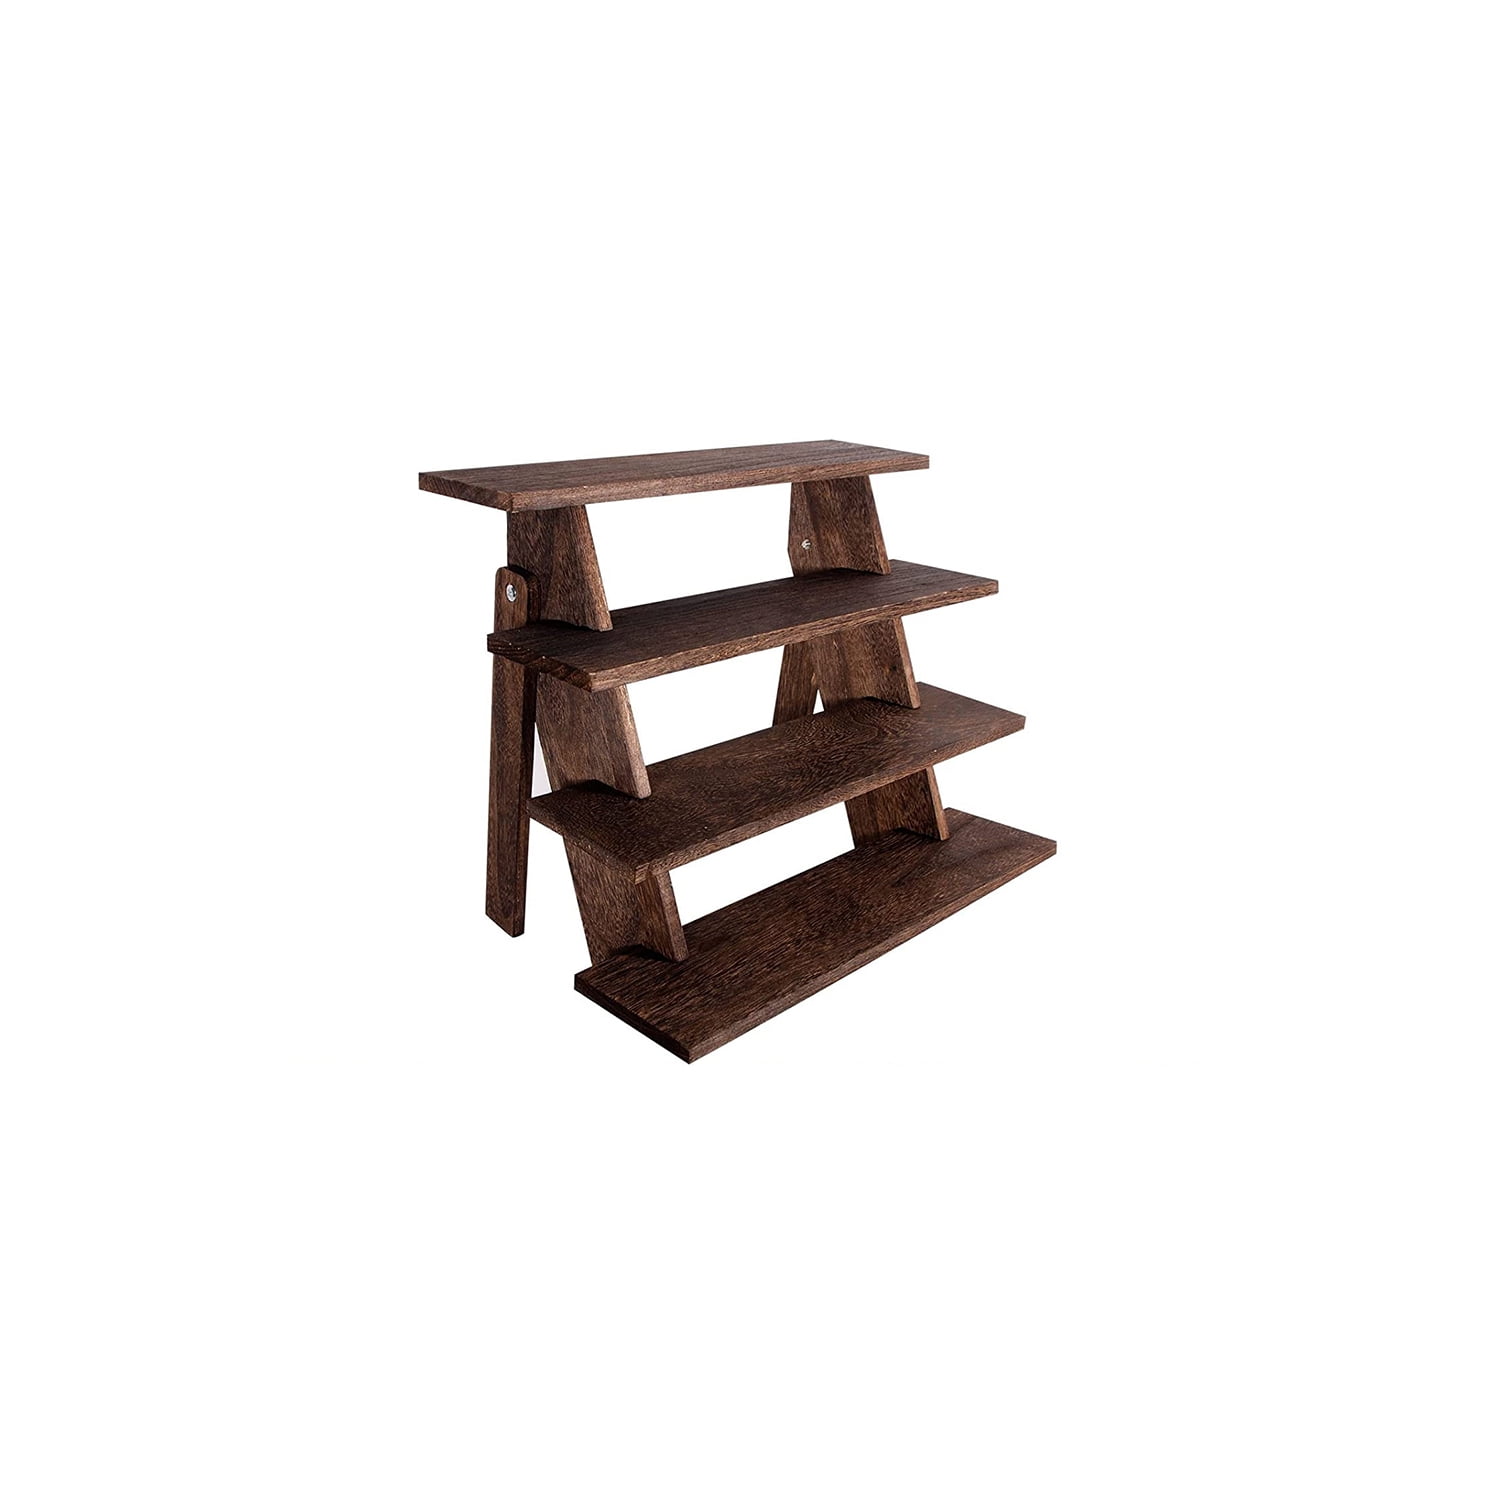 Wooden Display Stand Wood Cupcake Stands Tool Free, Rustic Risers for  Display Ideal Craft Funko Pop Shelves Table Display Stand for Vendors Wood  Riser